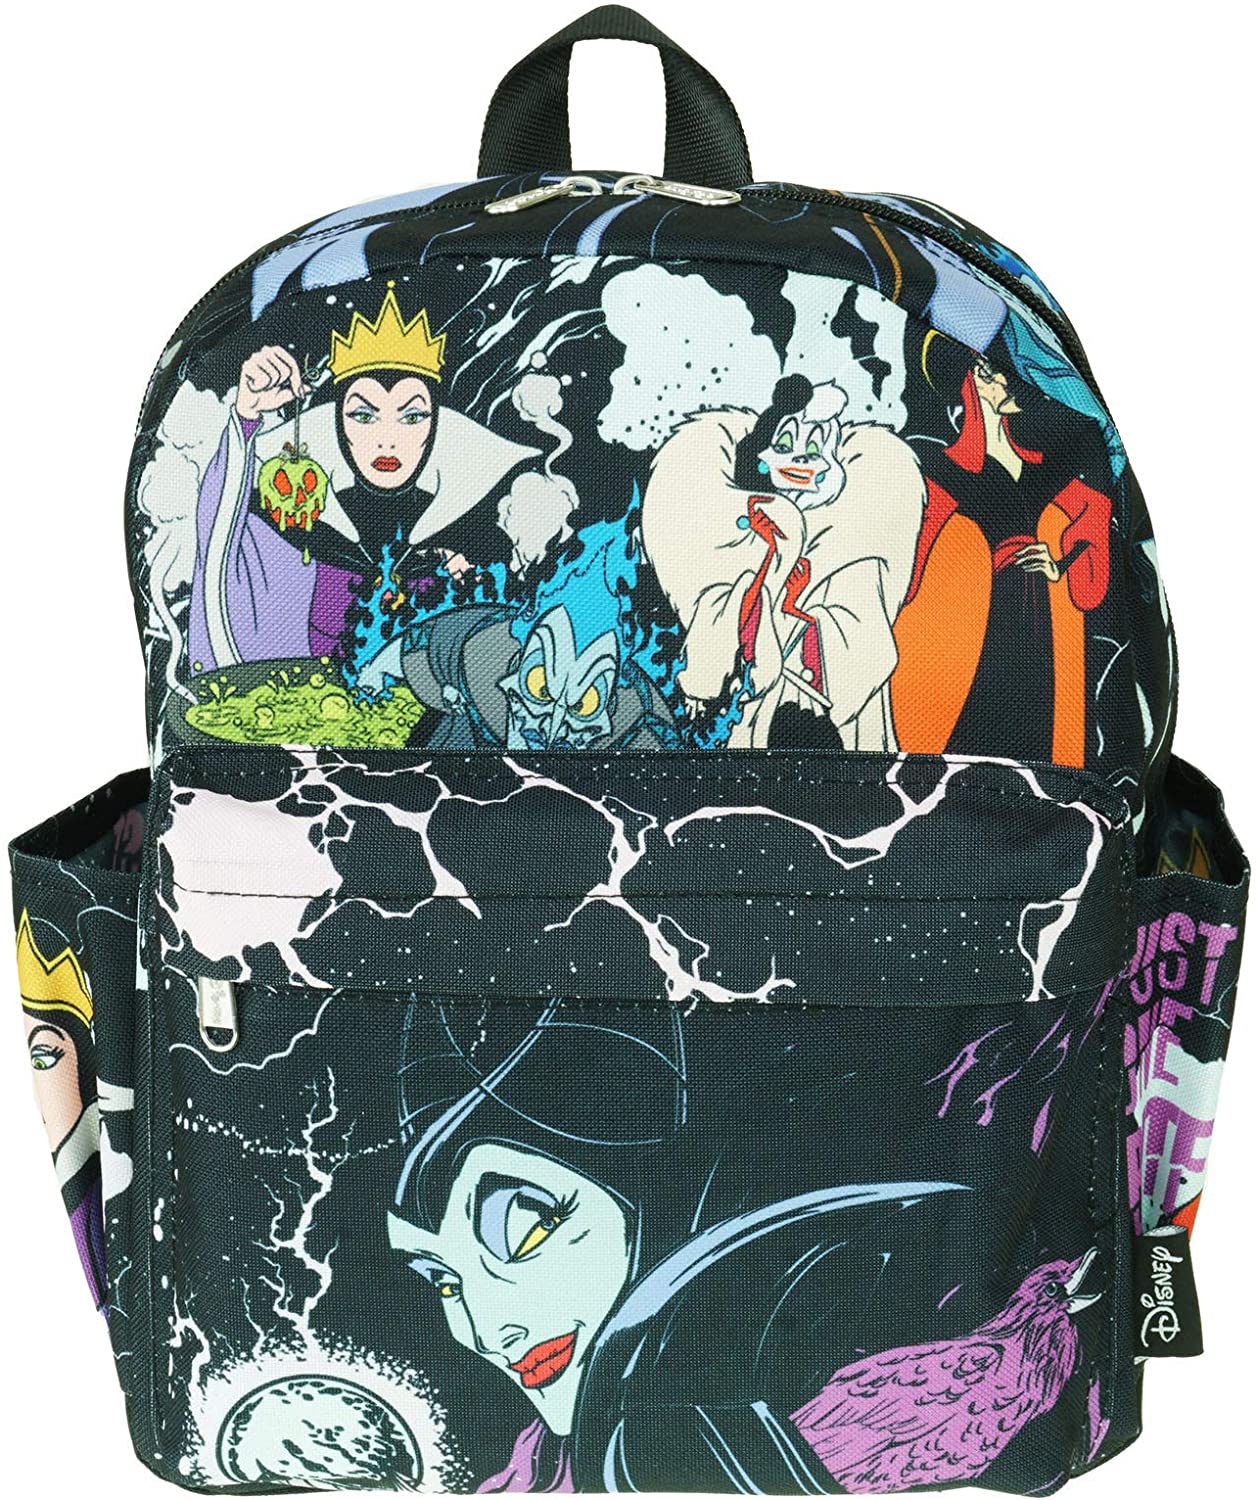 Villains 12" Deluxe Oversize Print Daypack - A21274 - GTE Zone